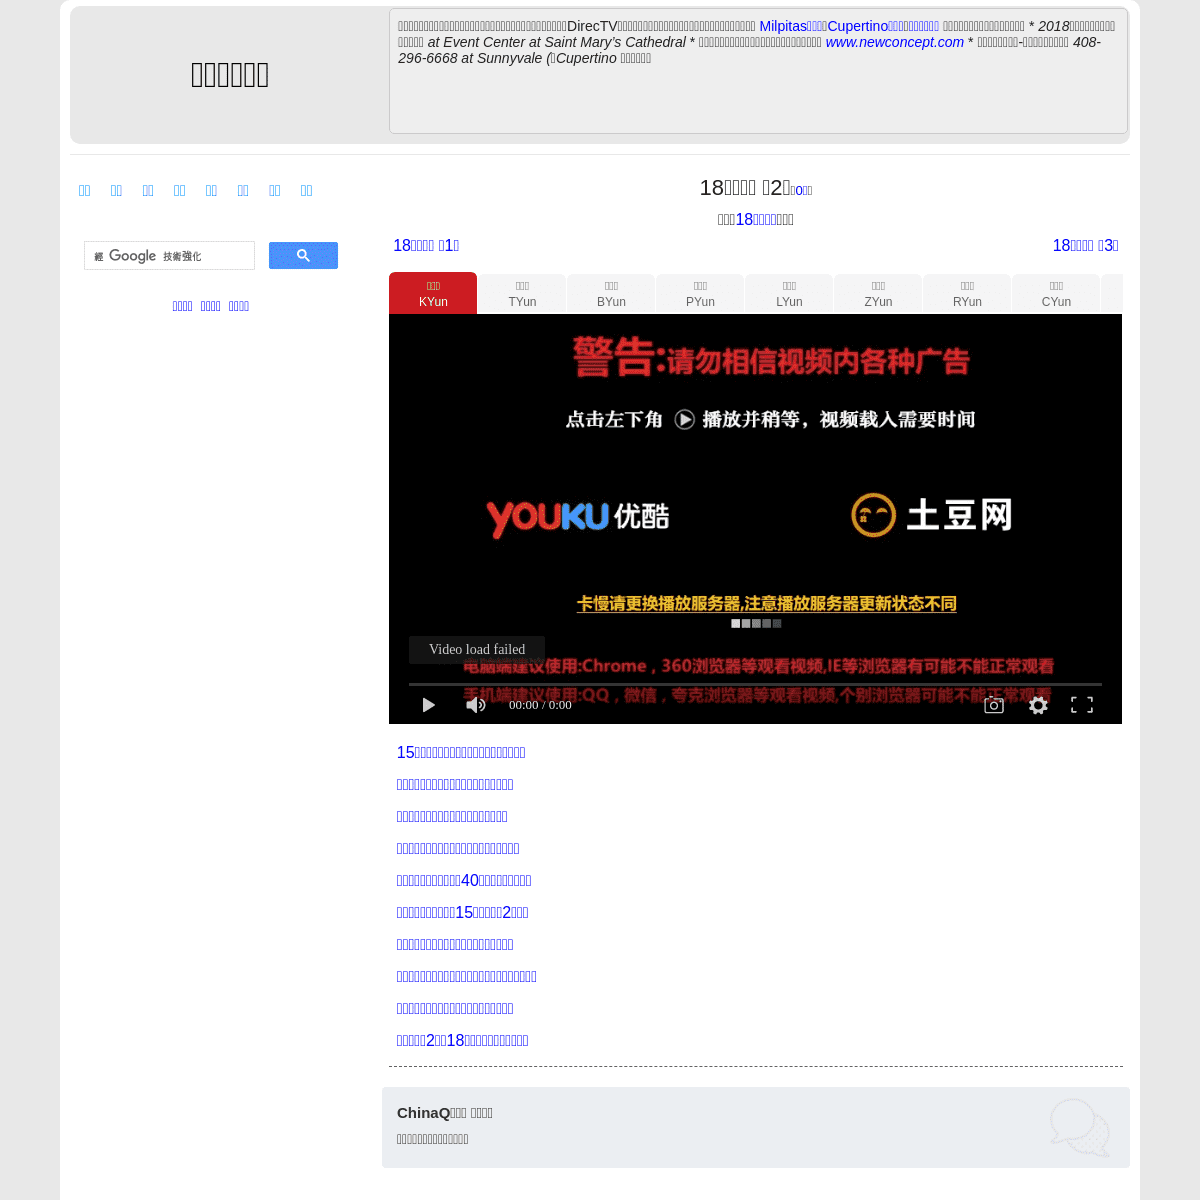 A complete backup of https://chinaq.me/kr190722/2.html